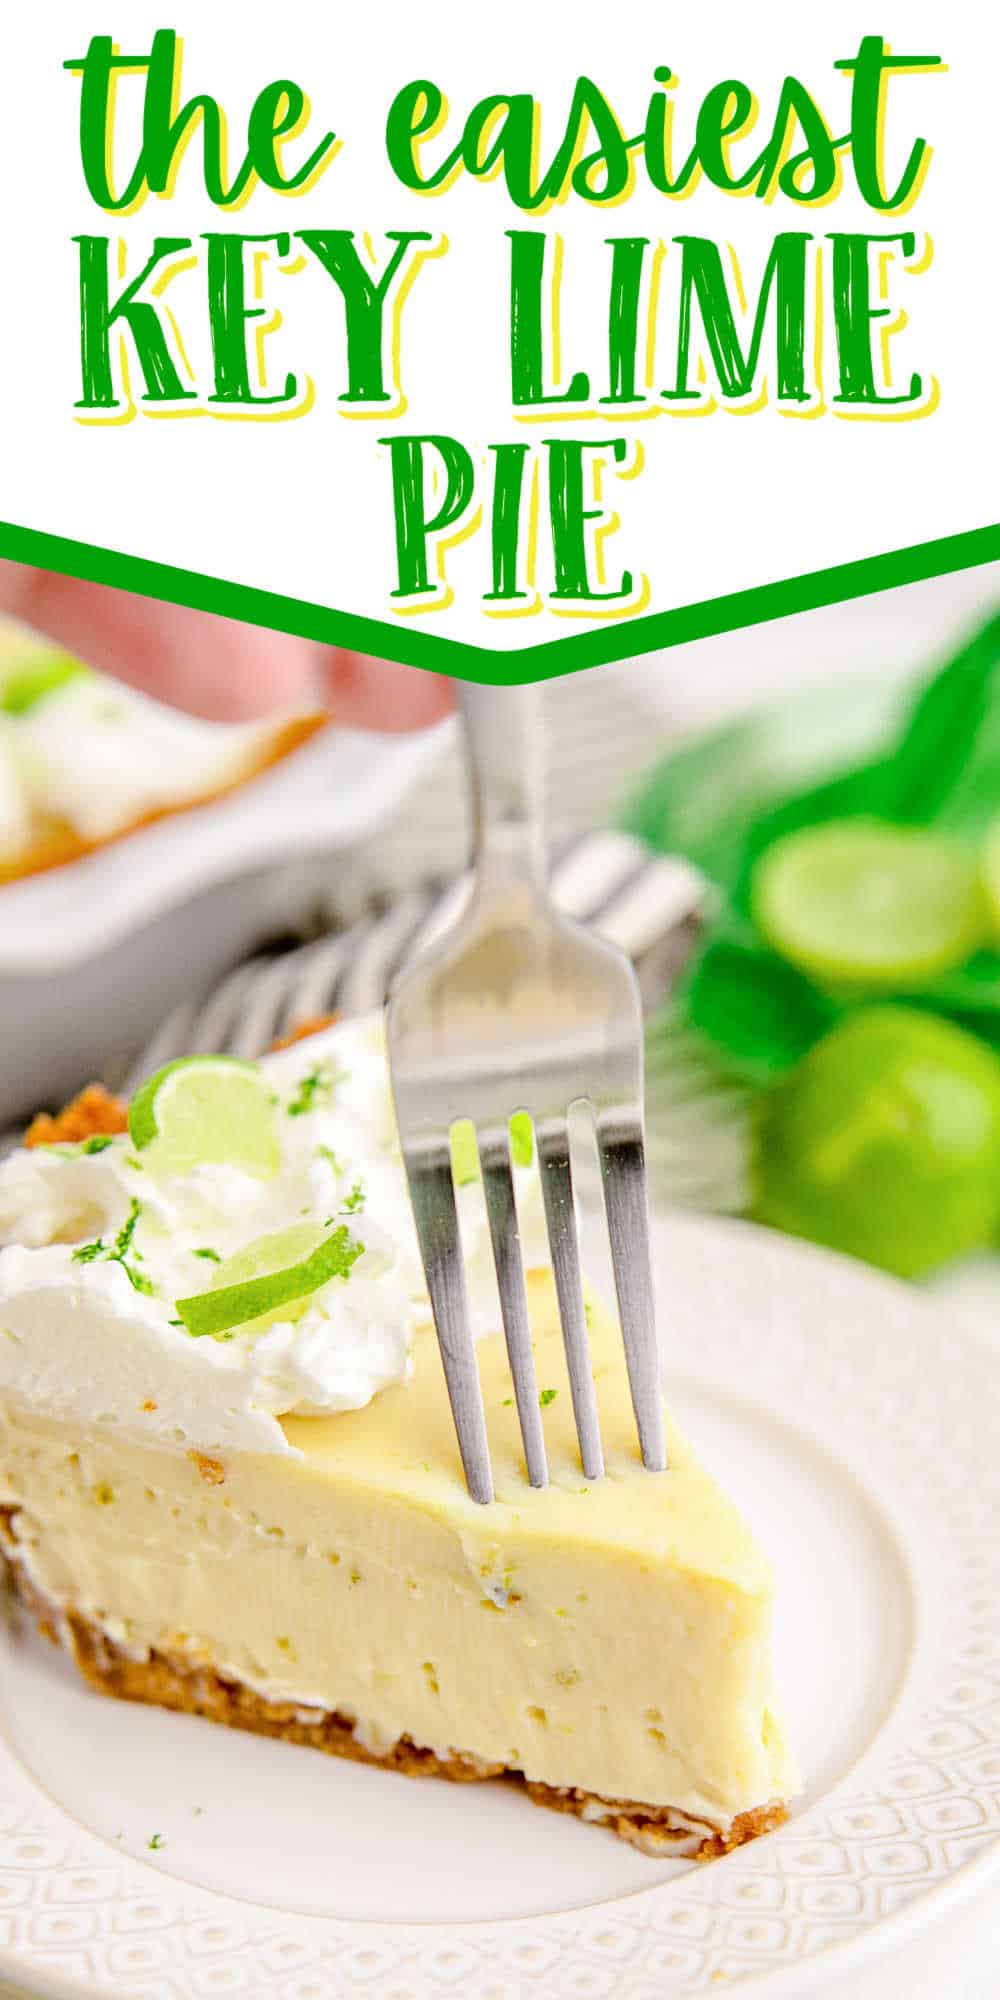 pie with fork and text "the easiest key lime pie"